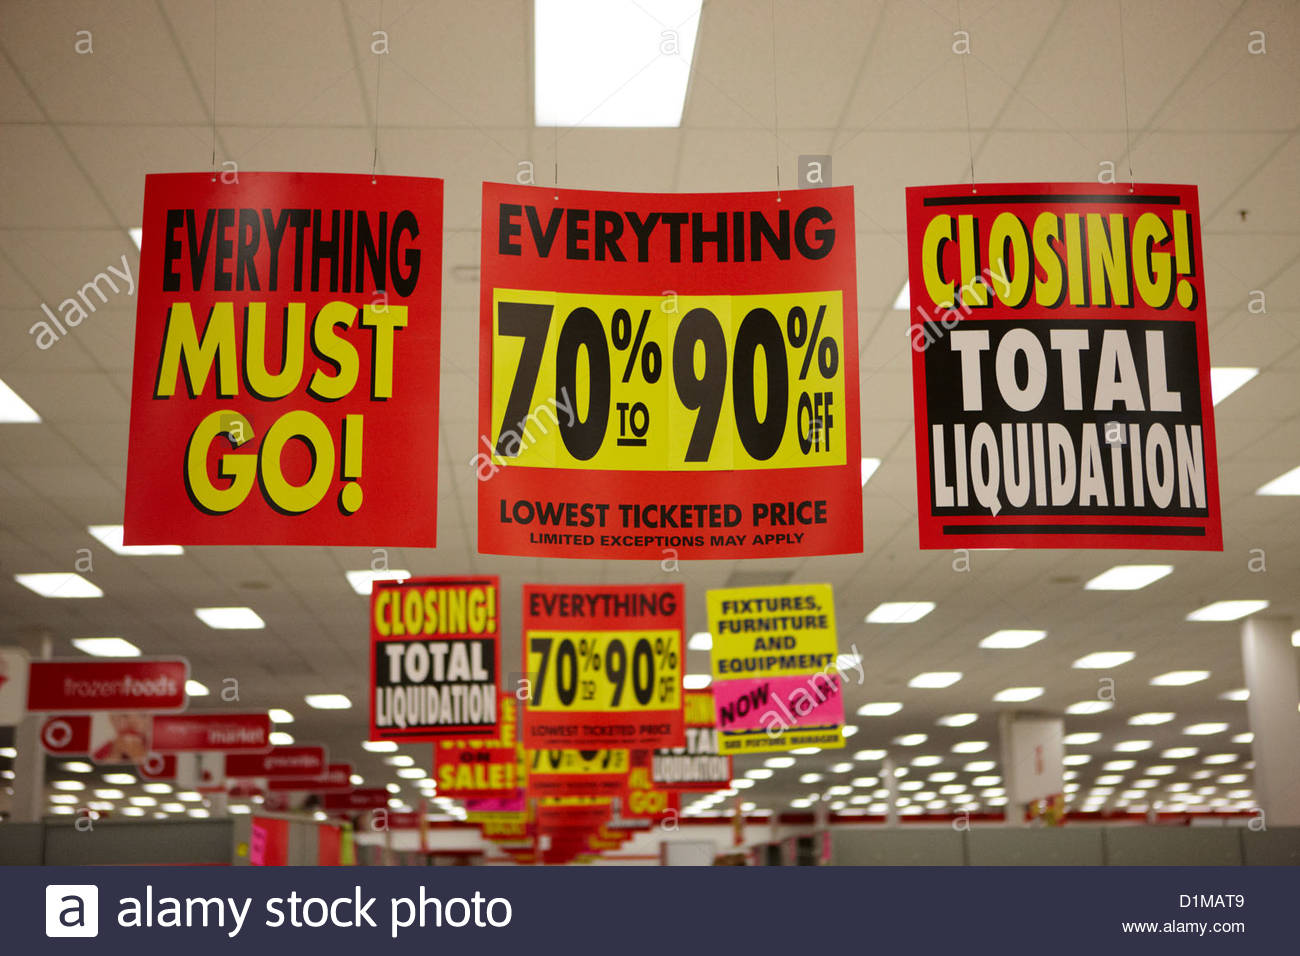 Amazing Everything Must Go Pictures & Backgrounds